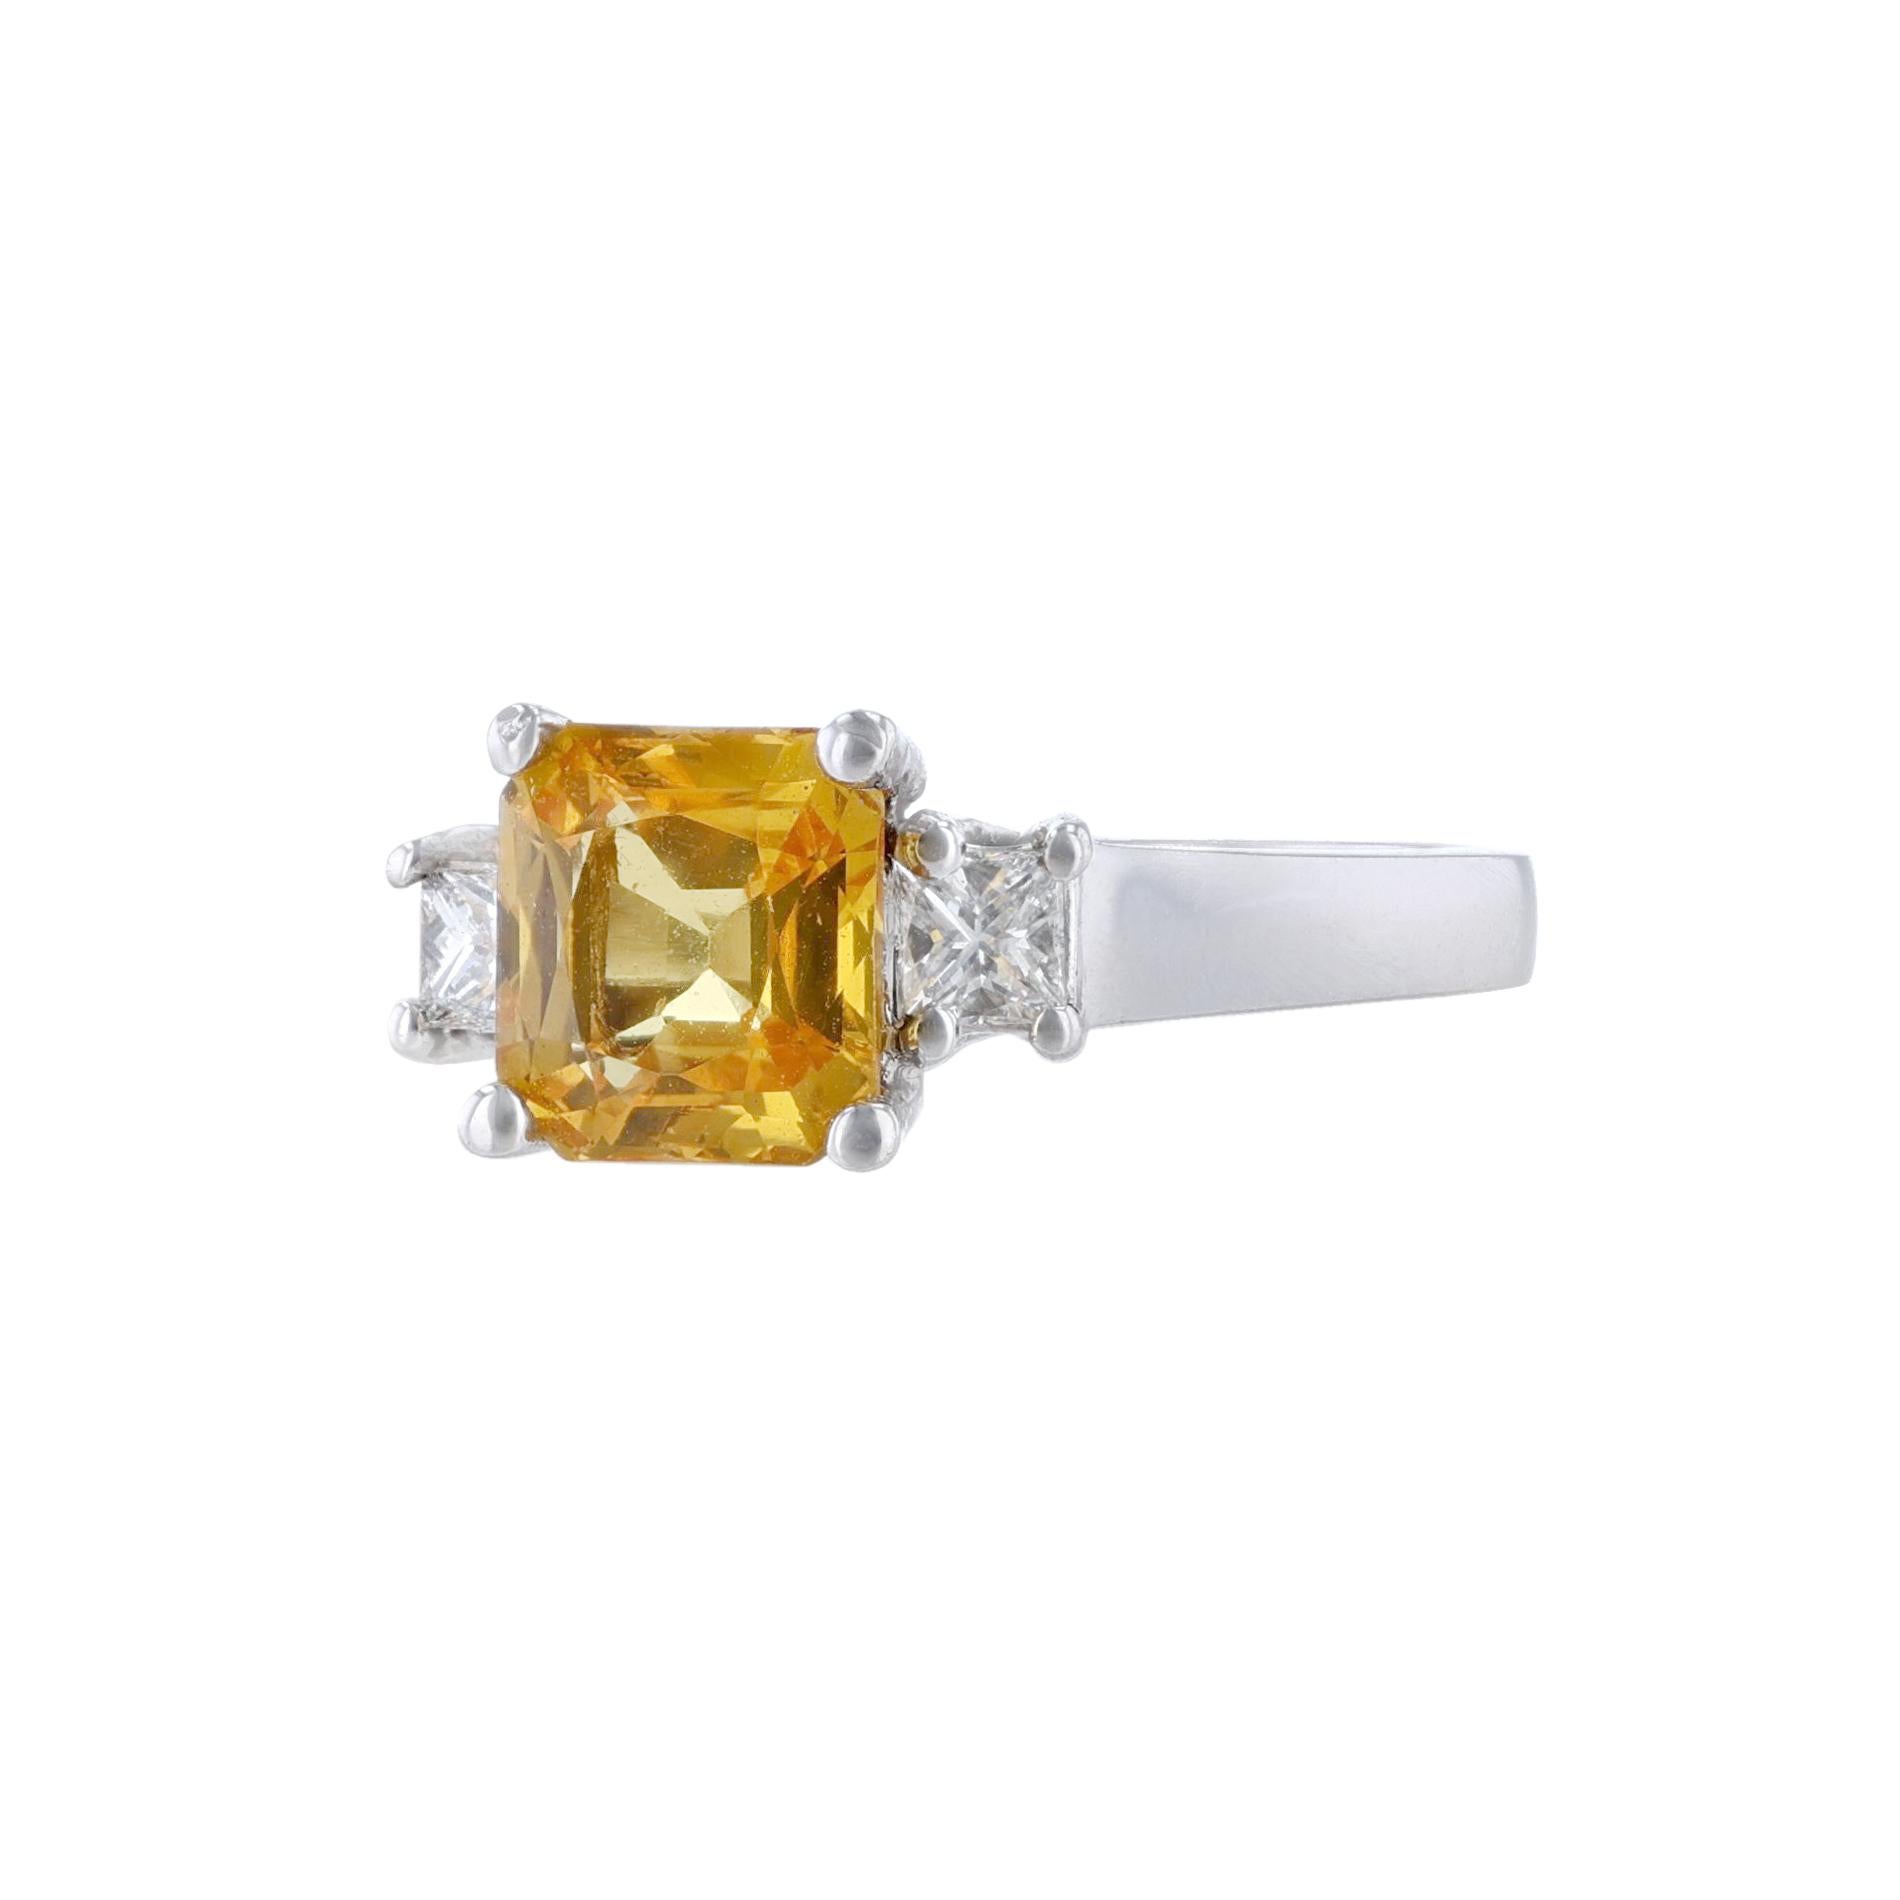 This ring is in 14K white gold. It features 1 princess-cut yellow sapphire weighing 1.88 carats. With 2 princess cut diamonds weighing 0.25 carats. With a color grade (H) and clarity grade (SI2). All stones are prong set.